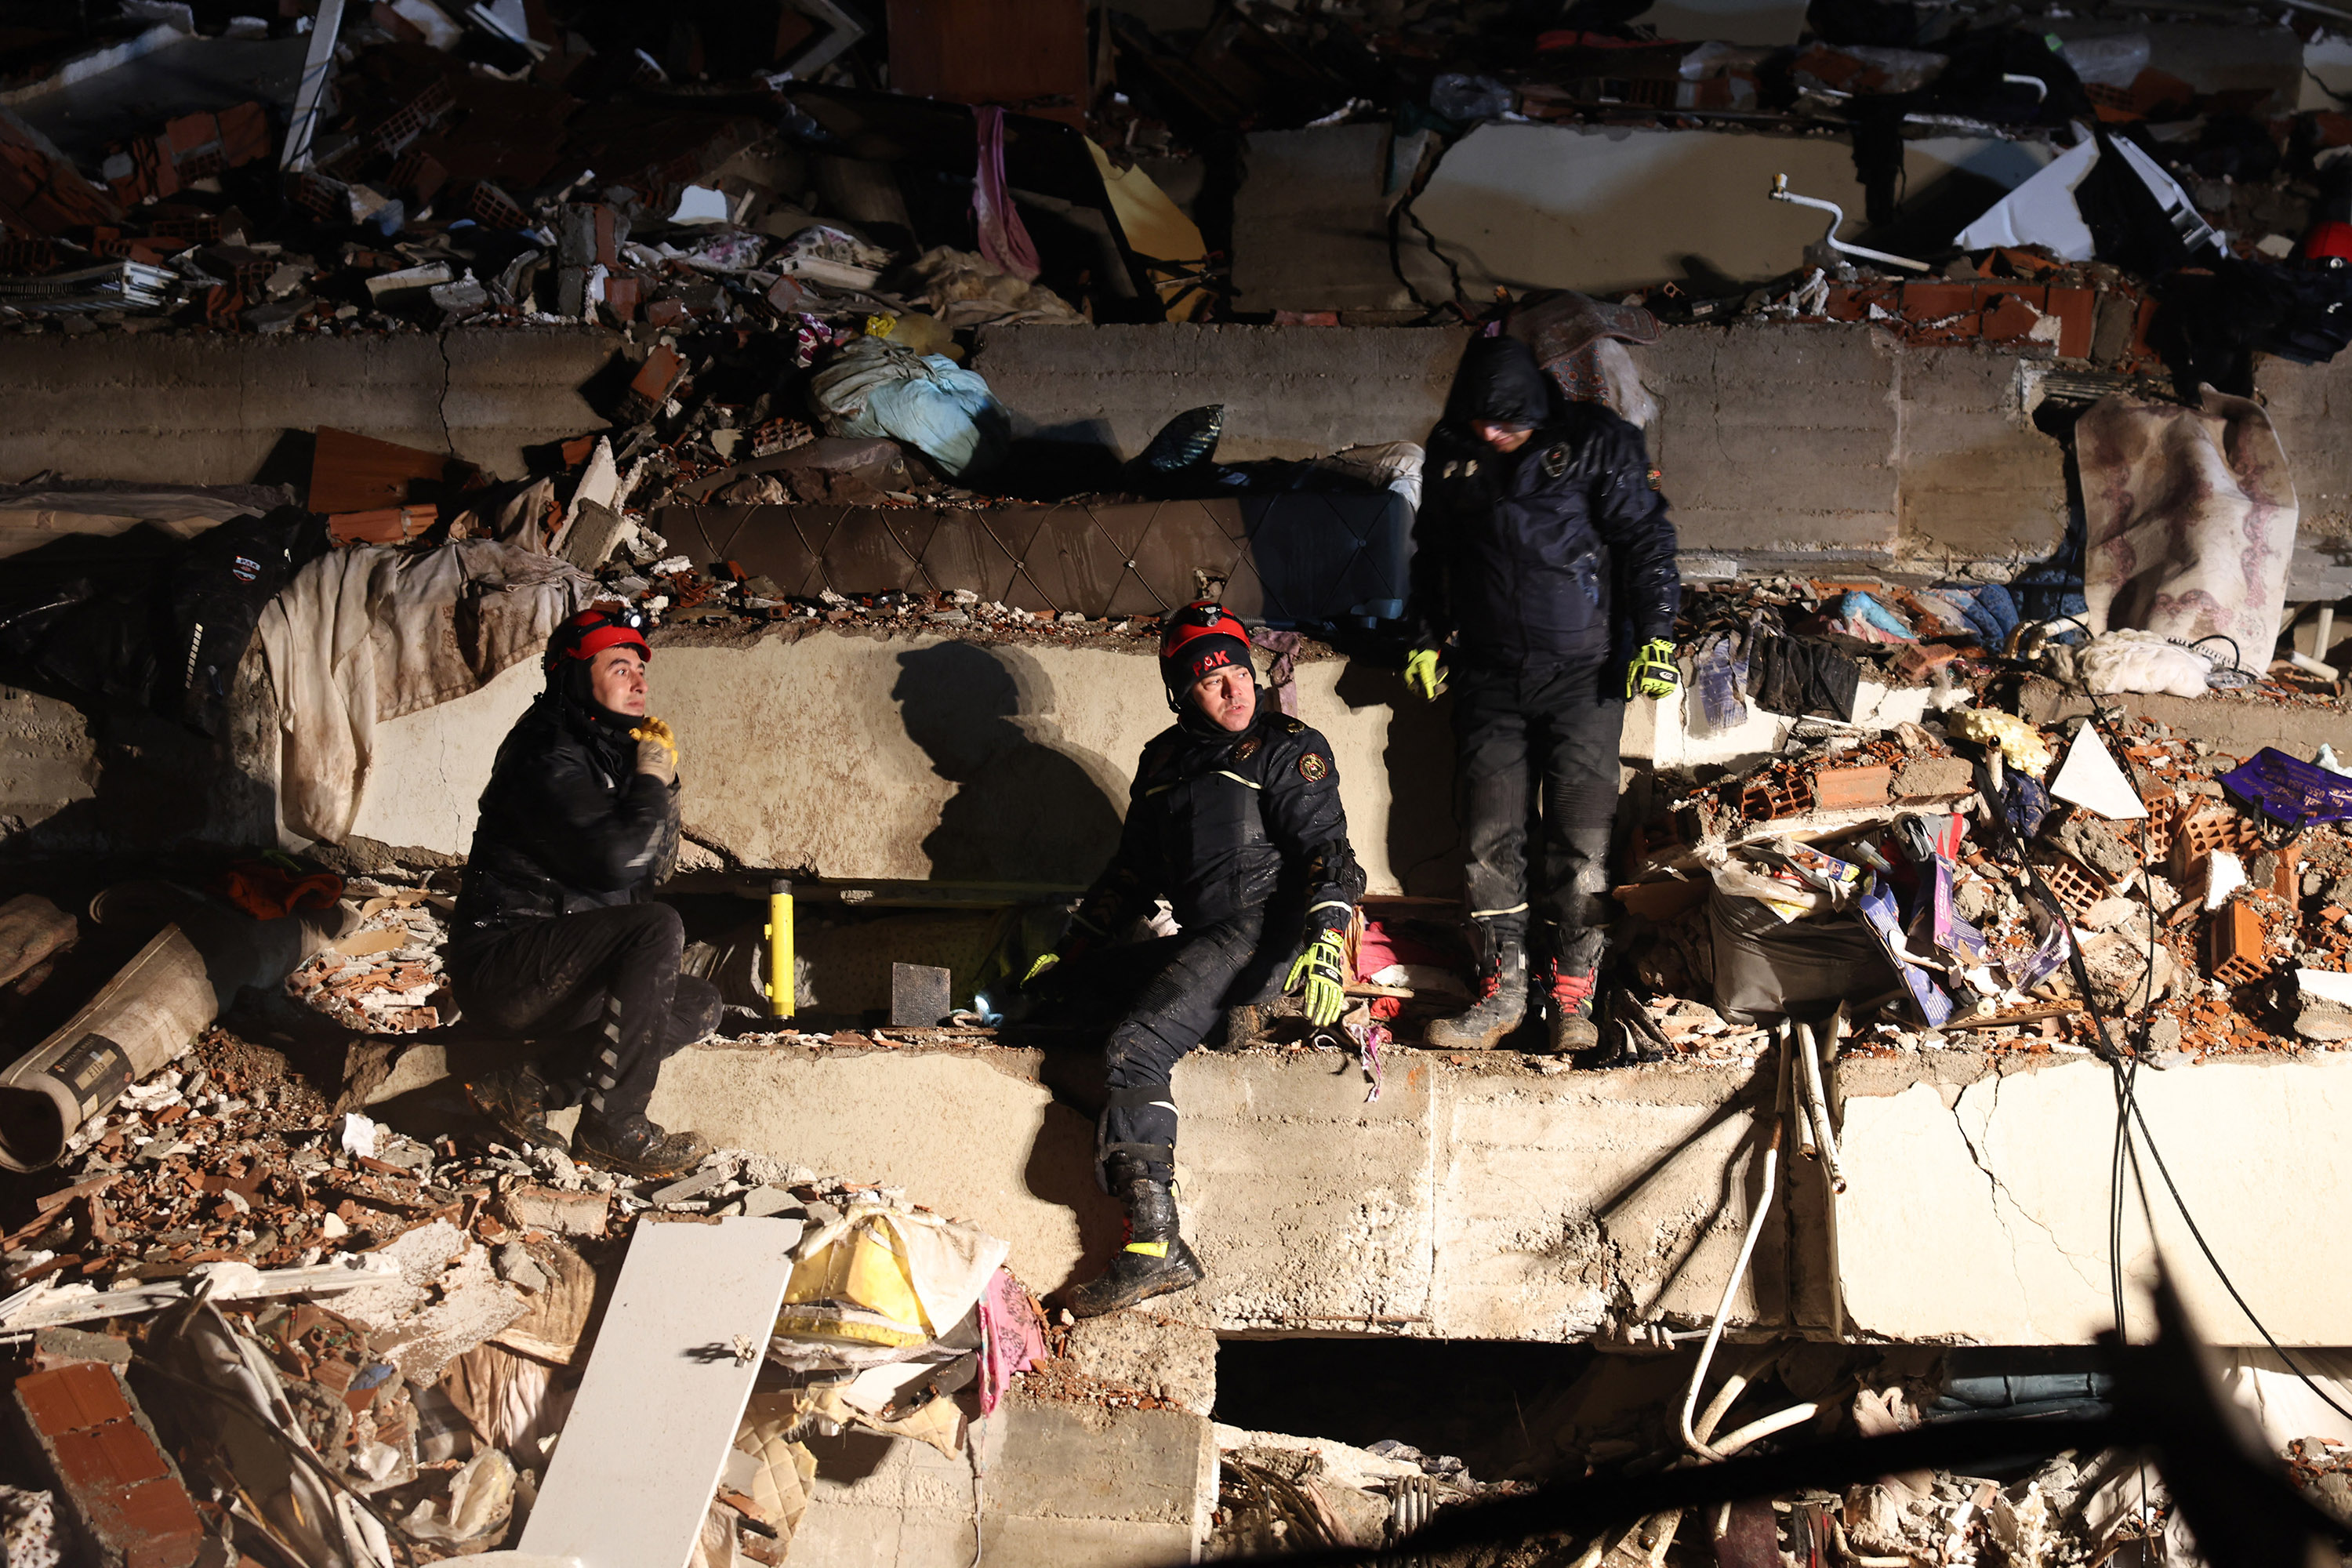 Rescuers search for victims and survivors amidst the rubble of collapsed buildings in Kahramanmaras, Turkey, on February 6.